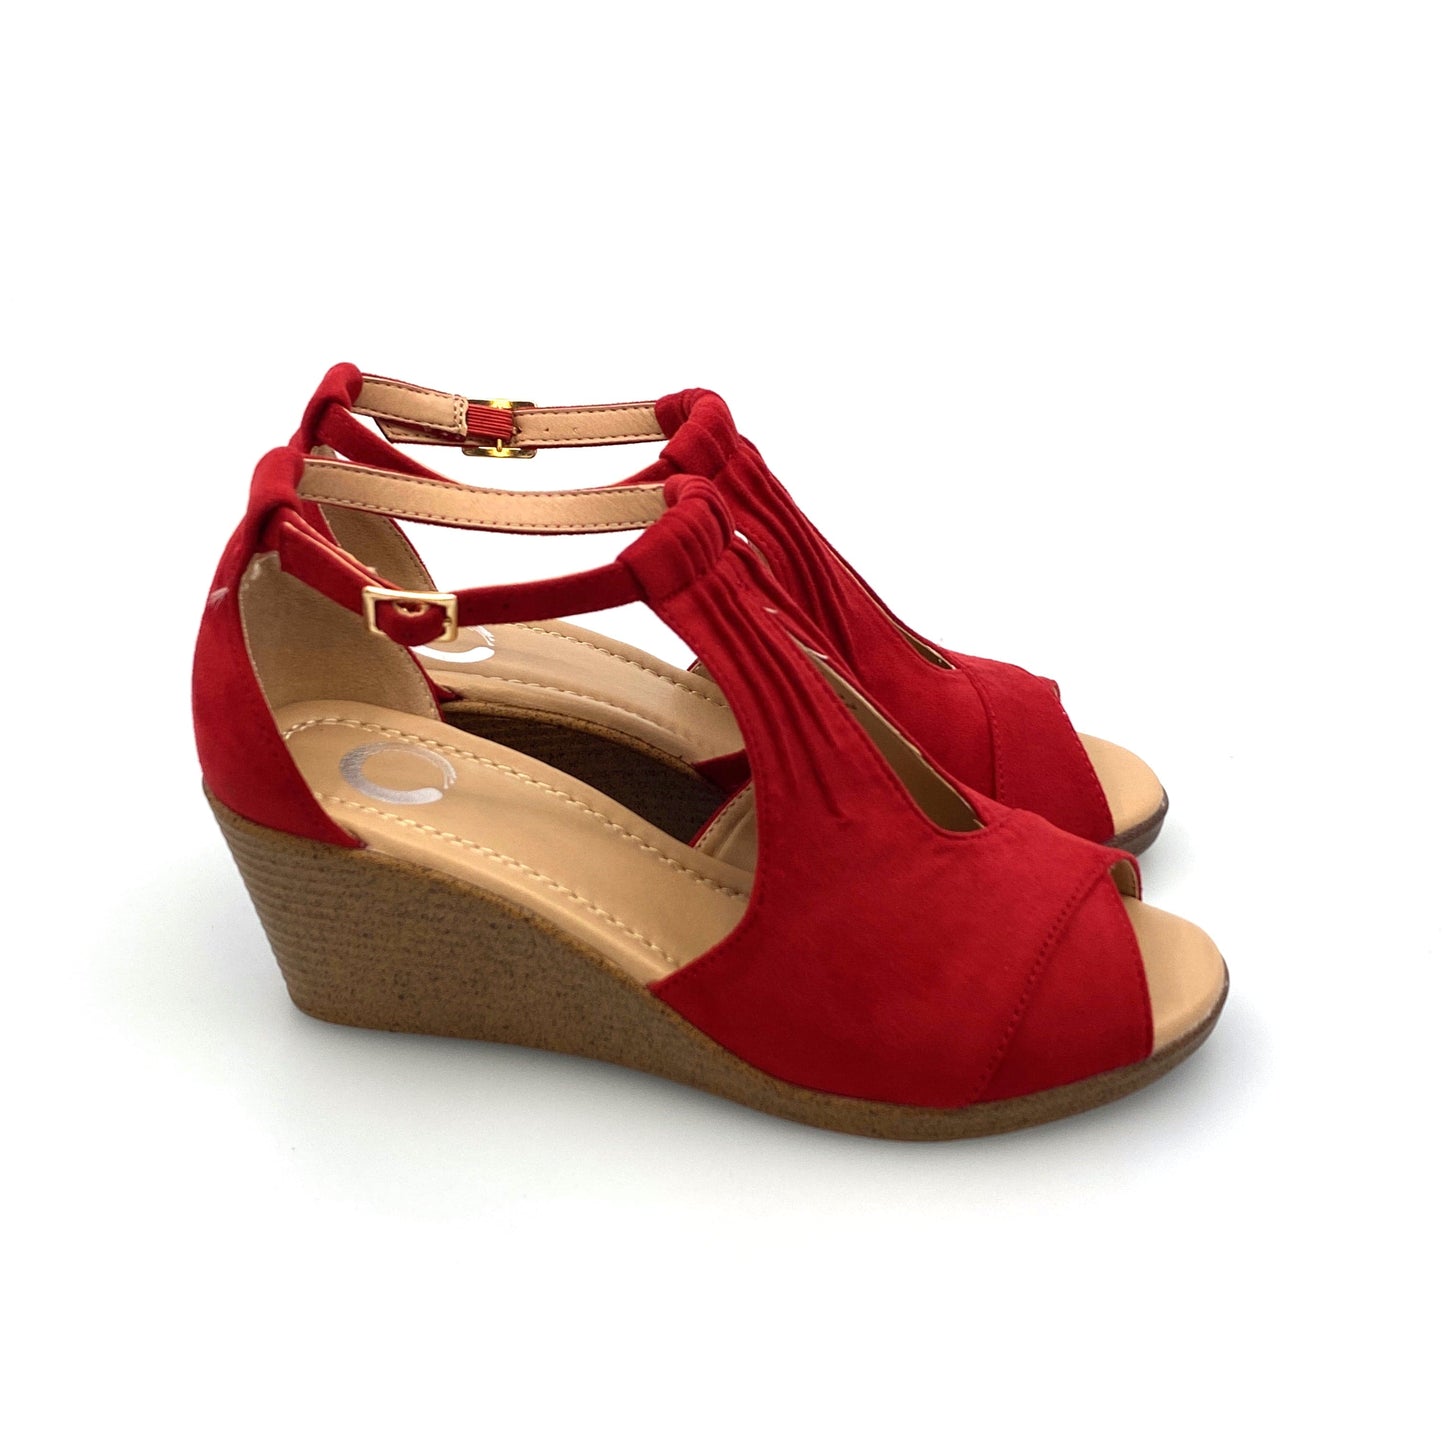 Journee Collection Womens Kedzie Wedge Sandals, Red, Size 7 Open Toe Shoes